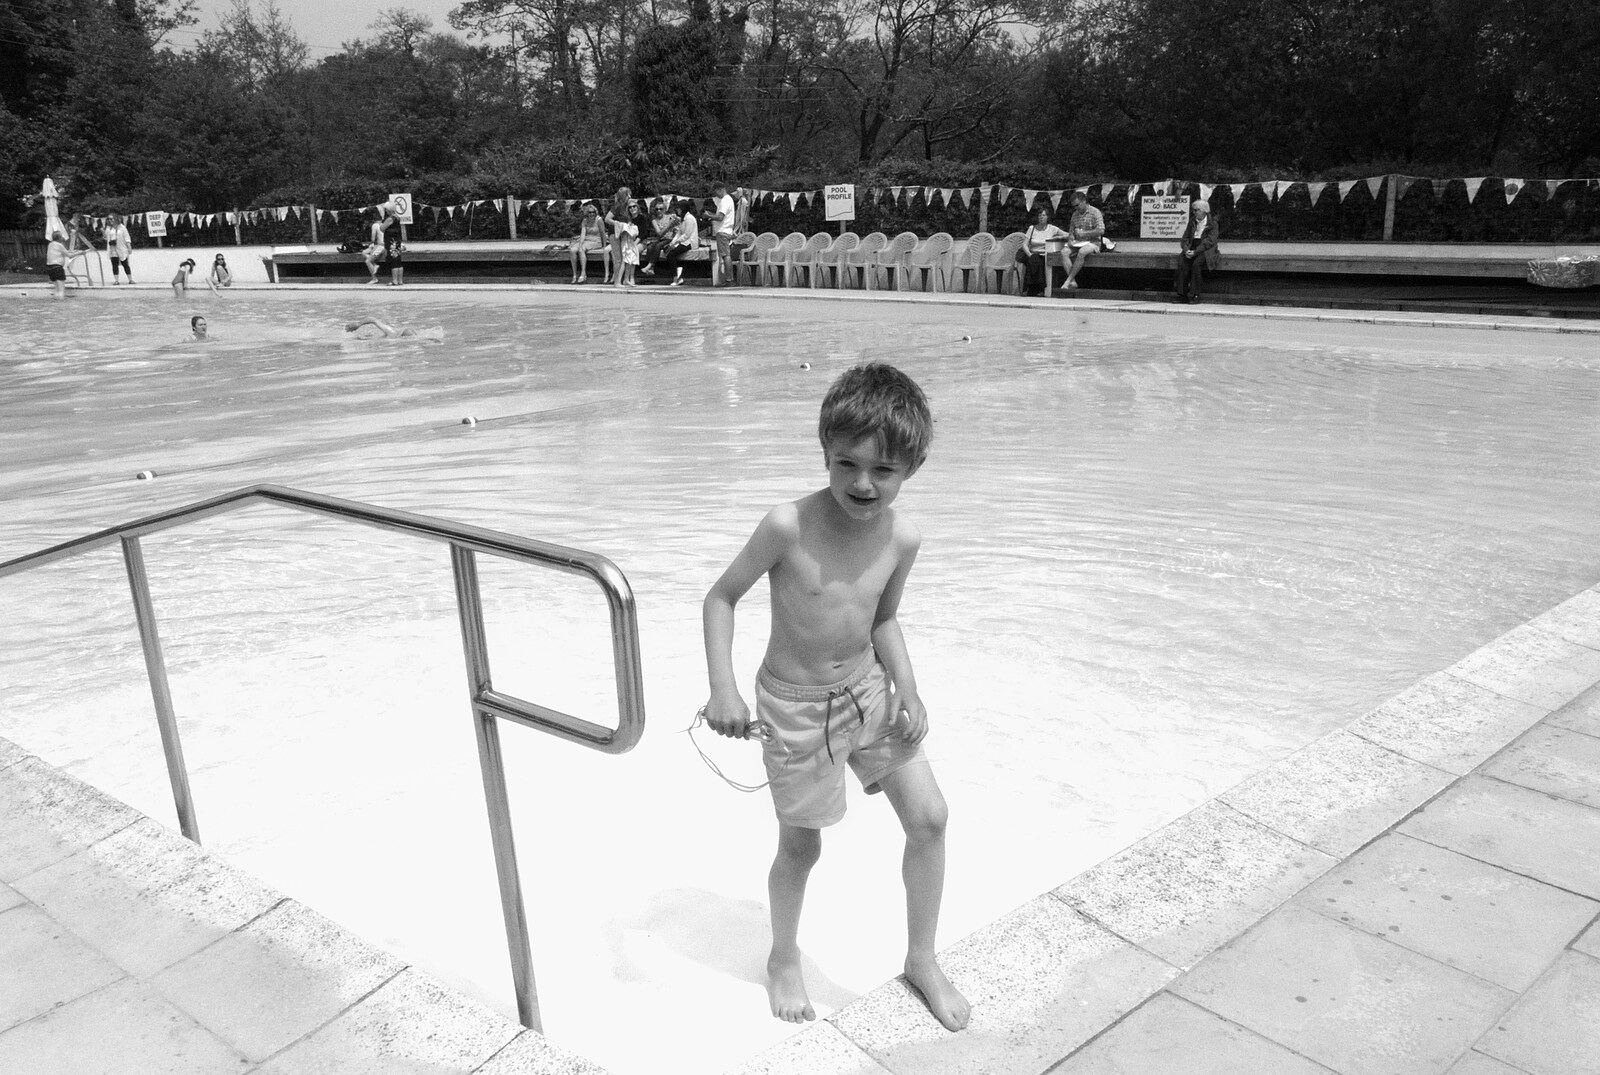 Fred gets out of the 'heated' freezing pool from The Grand Re-opening of the Chagford Lido, Chagford, Devon - 28th May 2016